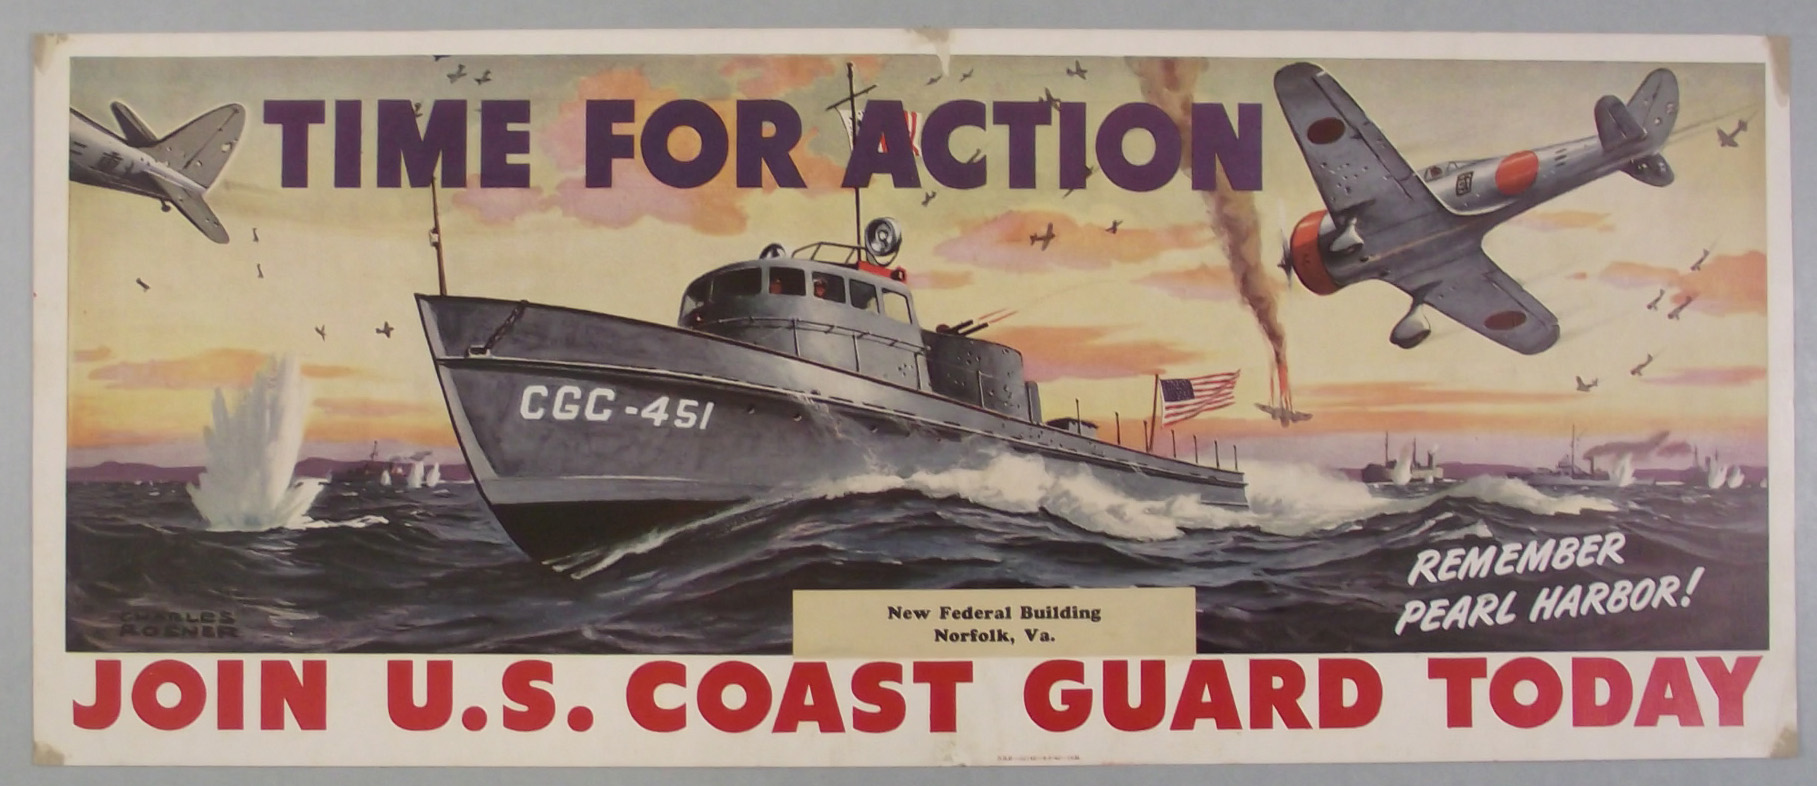 Early Coast Guard recruiting poster shows a Coast Guard patrol boat battling attacking Japanese aircraft. (Courtesy of the Mariners’ Museum)